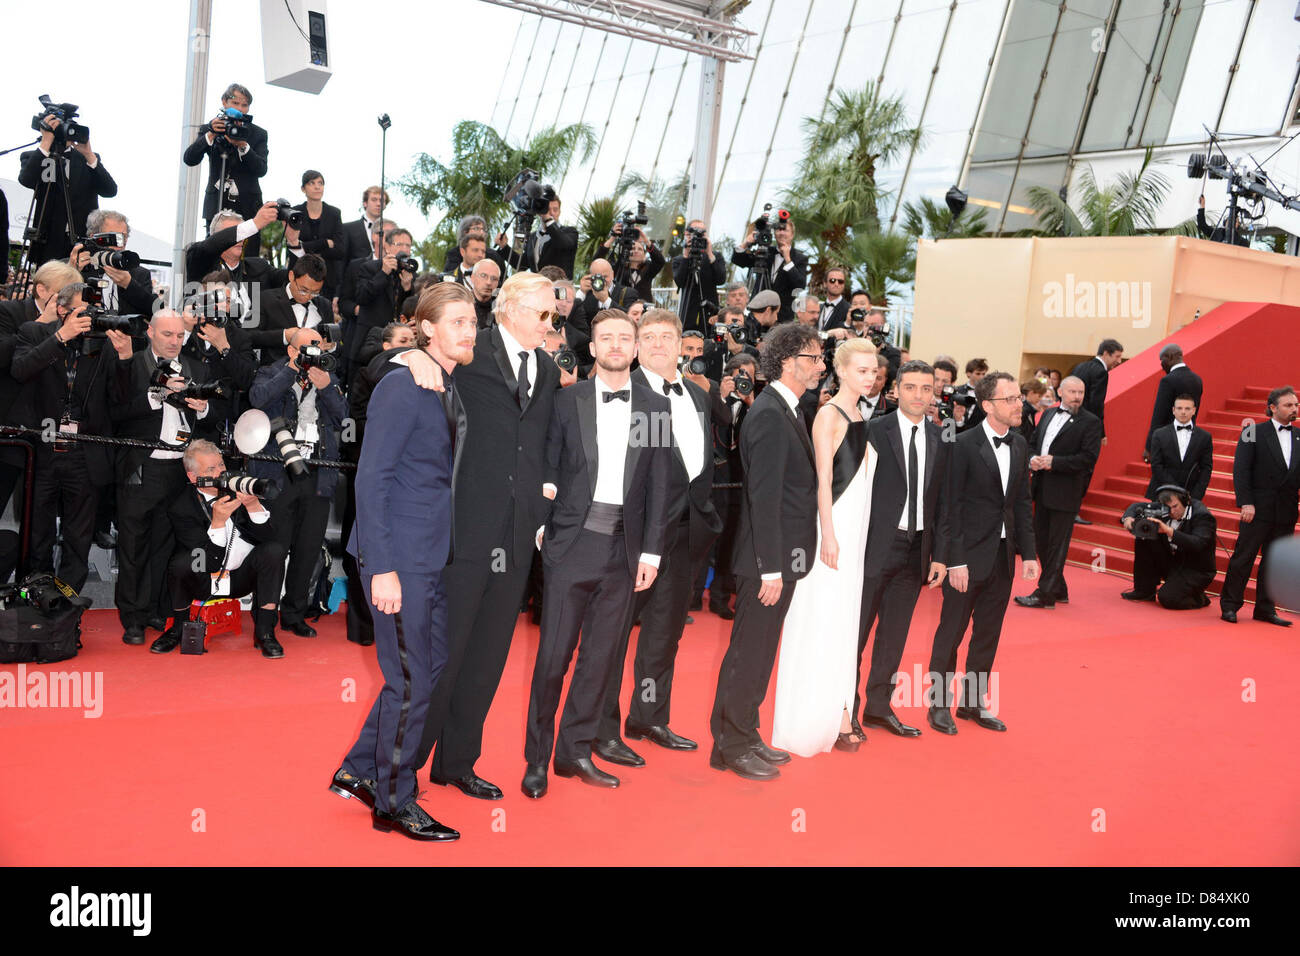 Cannes, France. 19th May 2013. (L-R) General Delegate of the Cannes Film Festival Thierry Fremaux, Actor John Goodman, Garrett Hedlund, director Joel Coen, actors Oscar Isaac, Carey Mulligan, Justin Timberlake, director Ethan Coen,John Goodman and musician and producer T Bone Burnett attend the Premiere of 'Inside Llewyn Davis' during the 66th Annual Cannes Film Festival at Palais des Festivals on May 19, 2013 in Cannes, France. (Credit Image: Credit:  Frederick Injimbert/ZUMAPRESS.com/Alamy Live News) Stock Photo